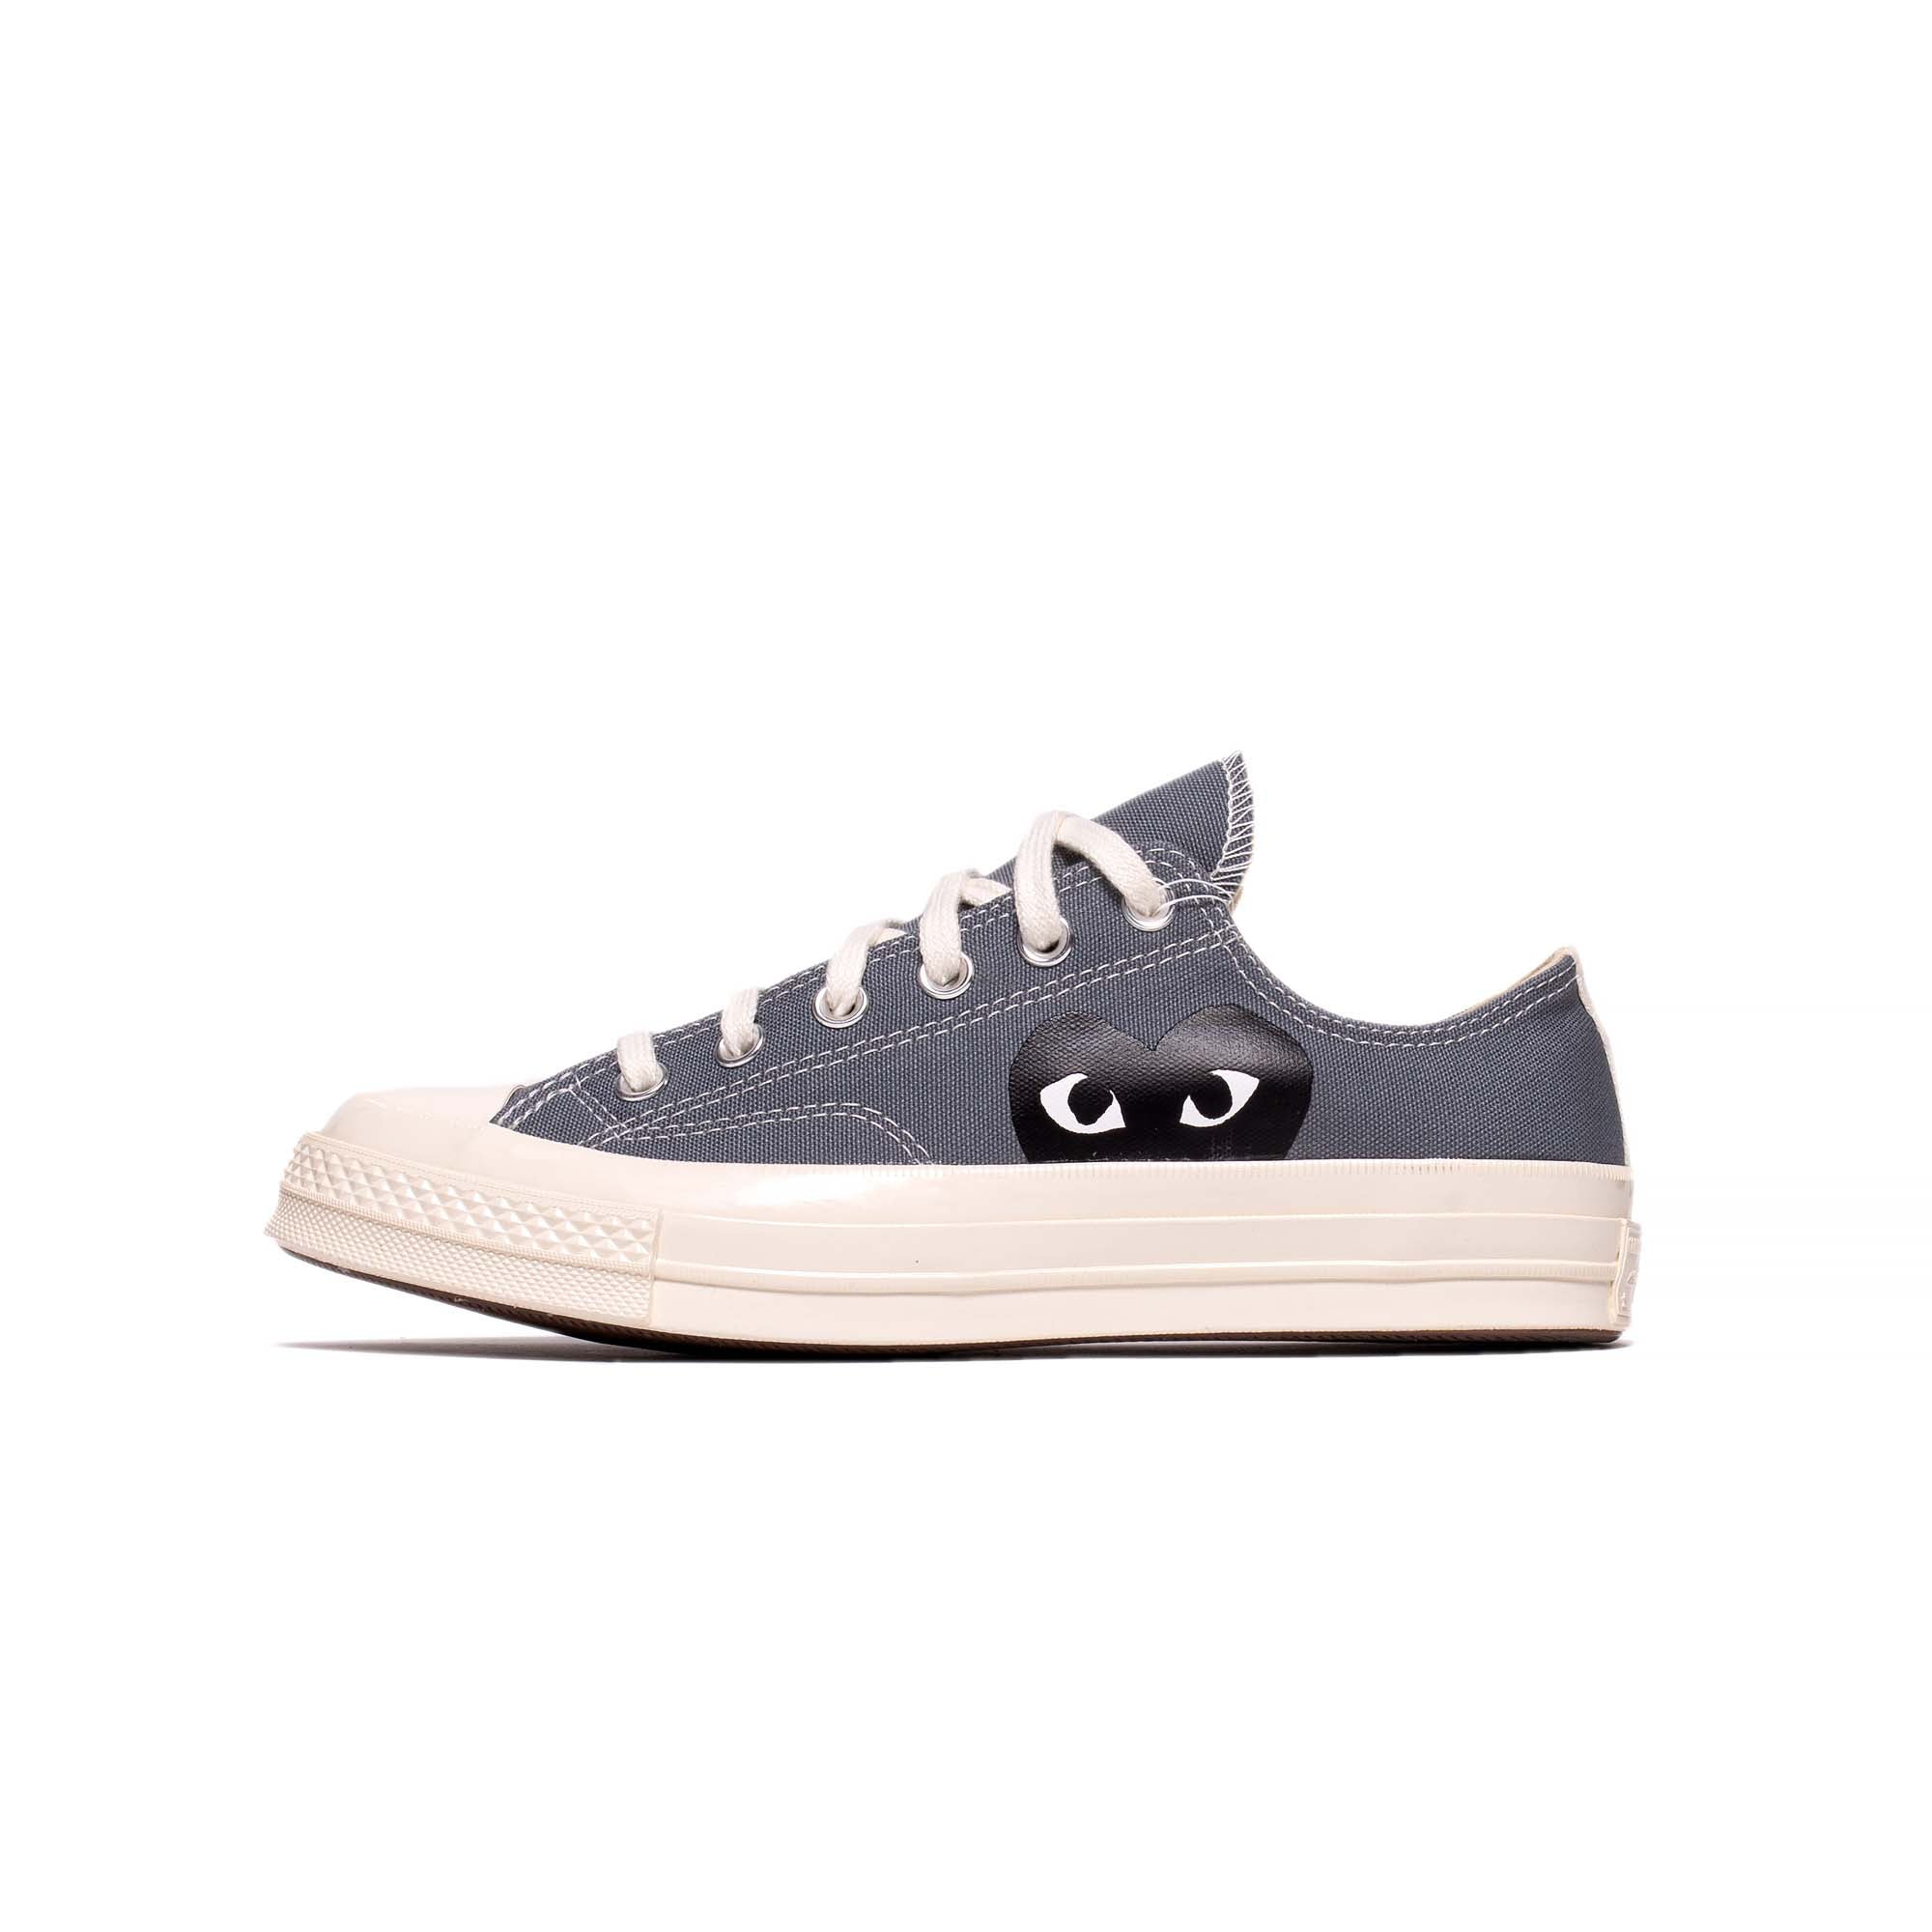 Converse x CDG Play Chuck 70 Ox Shoes 'Steel Gray' – Extra Butter